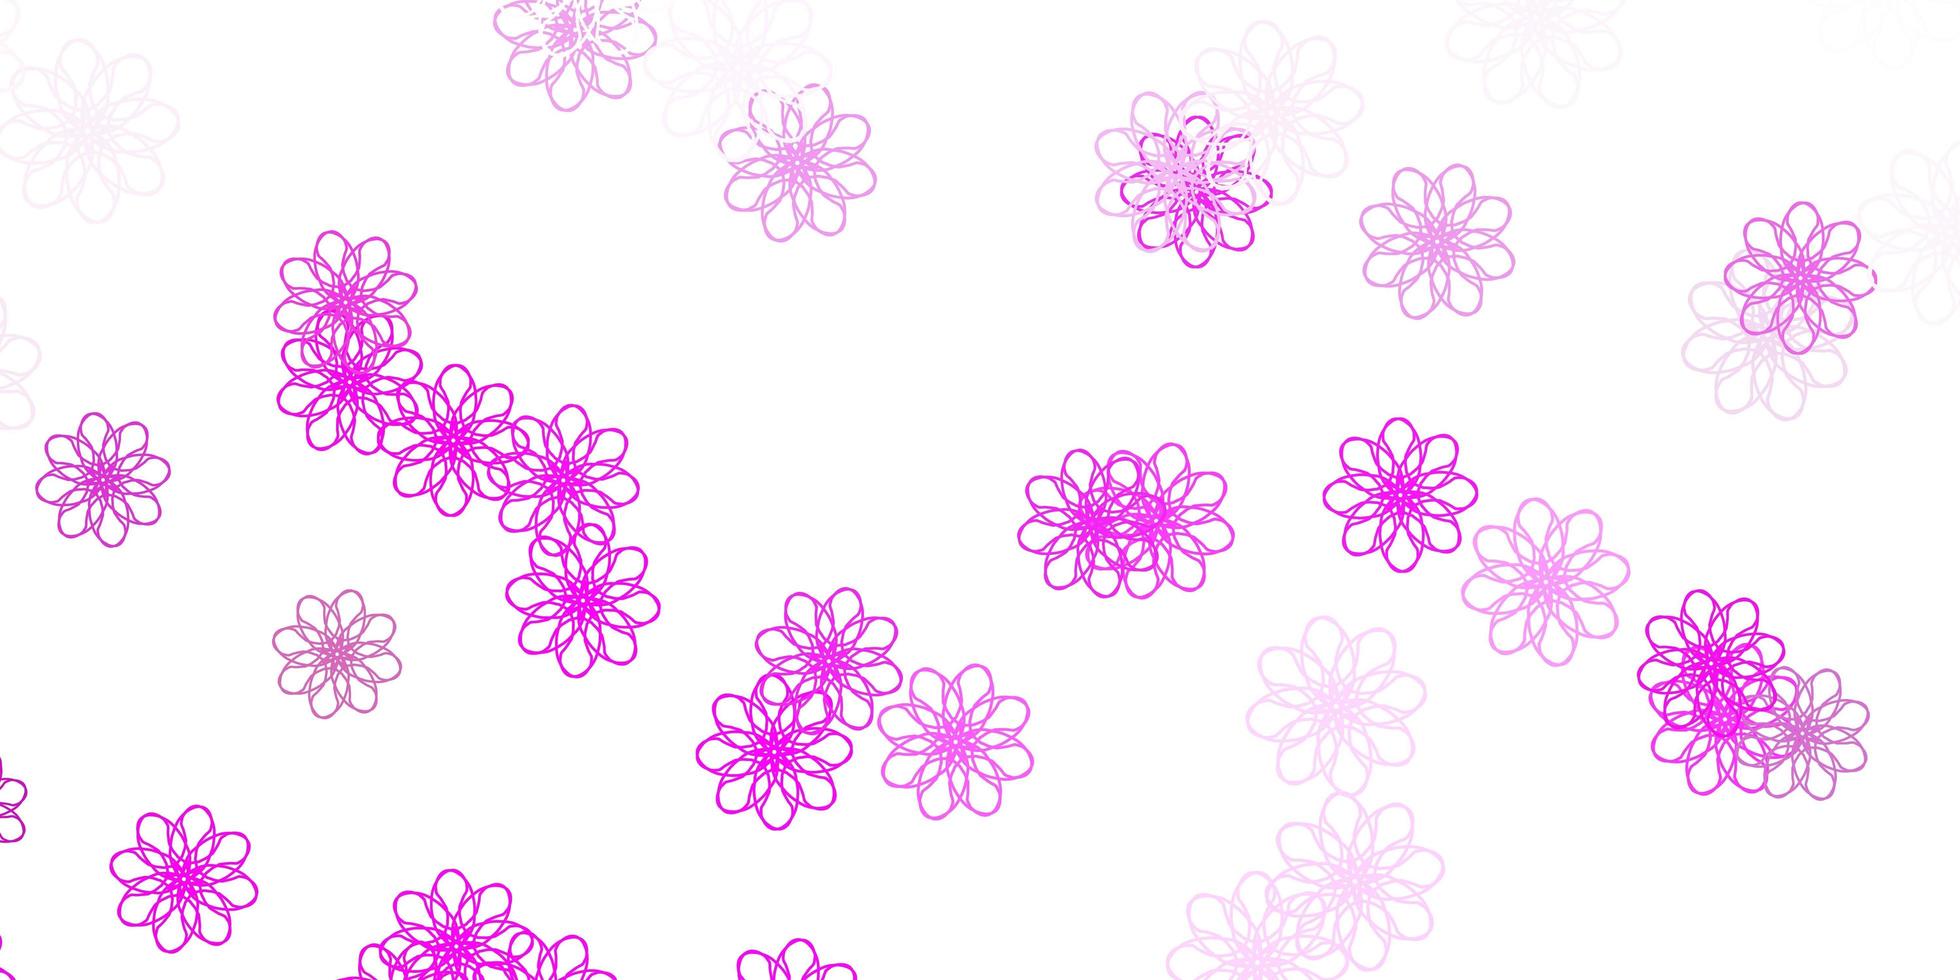 Light Pink vector natural layout with flowers.